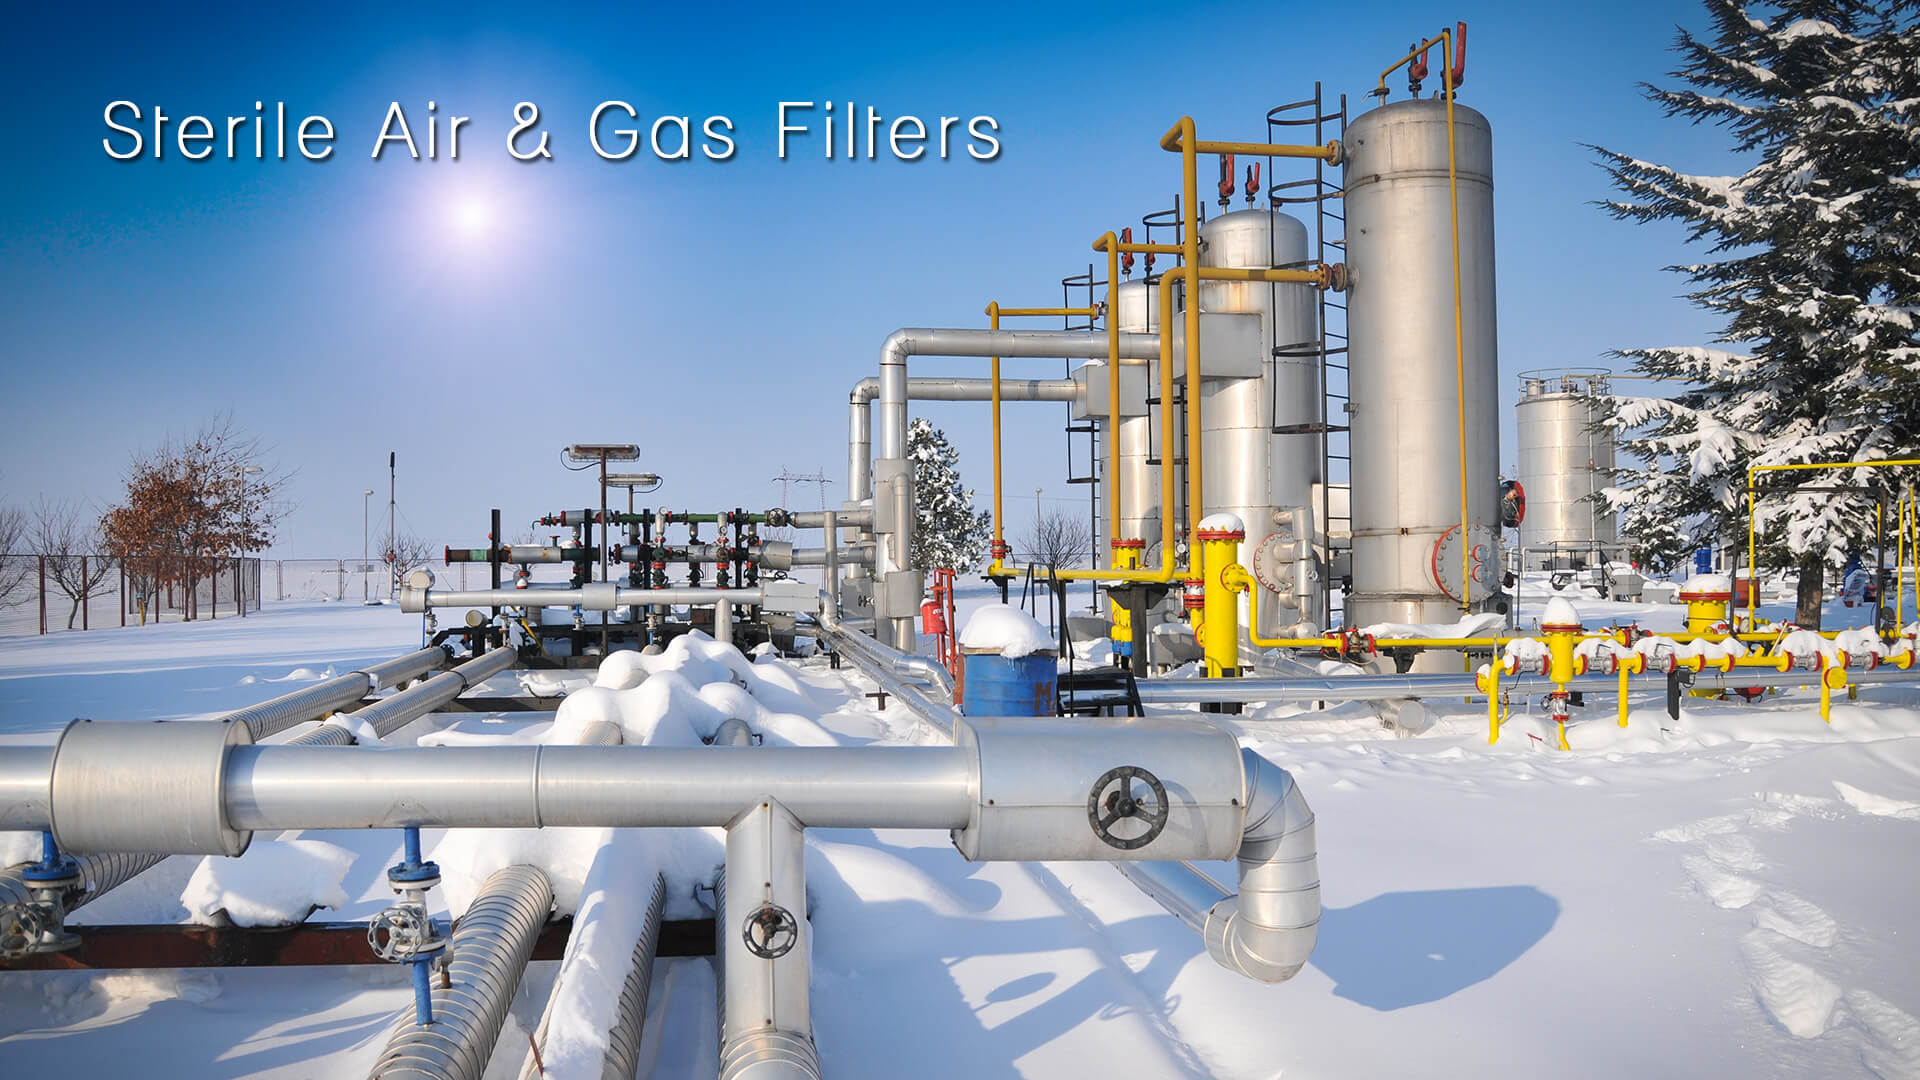 STERILE AIR AND GAS FILTERS